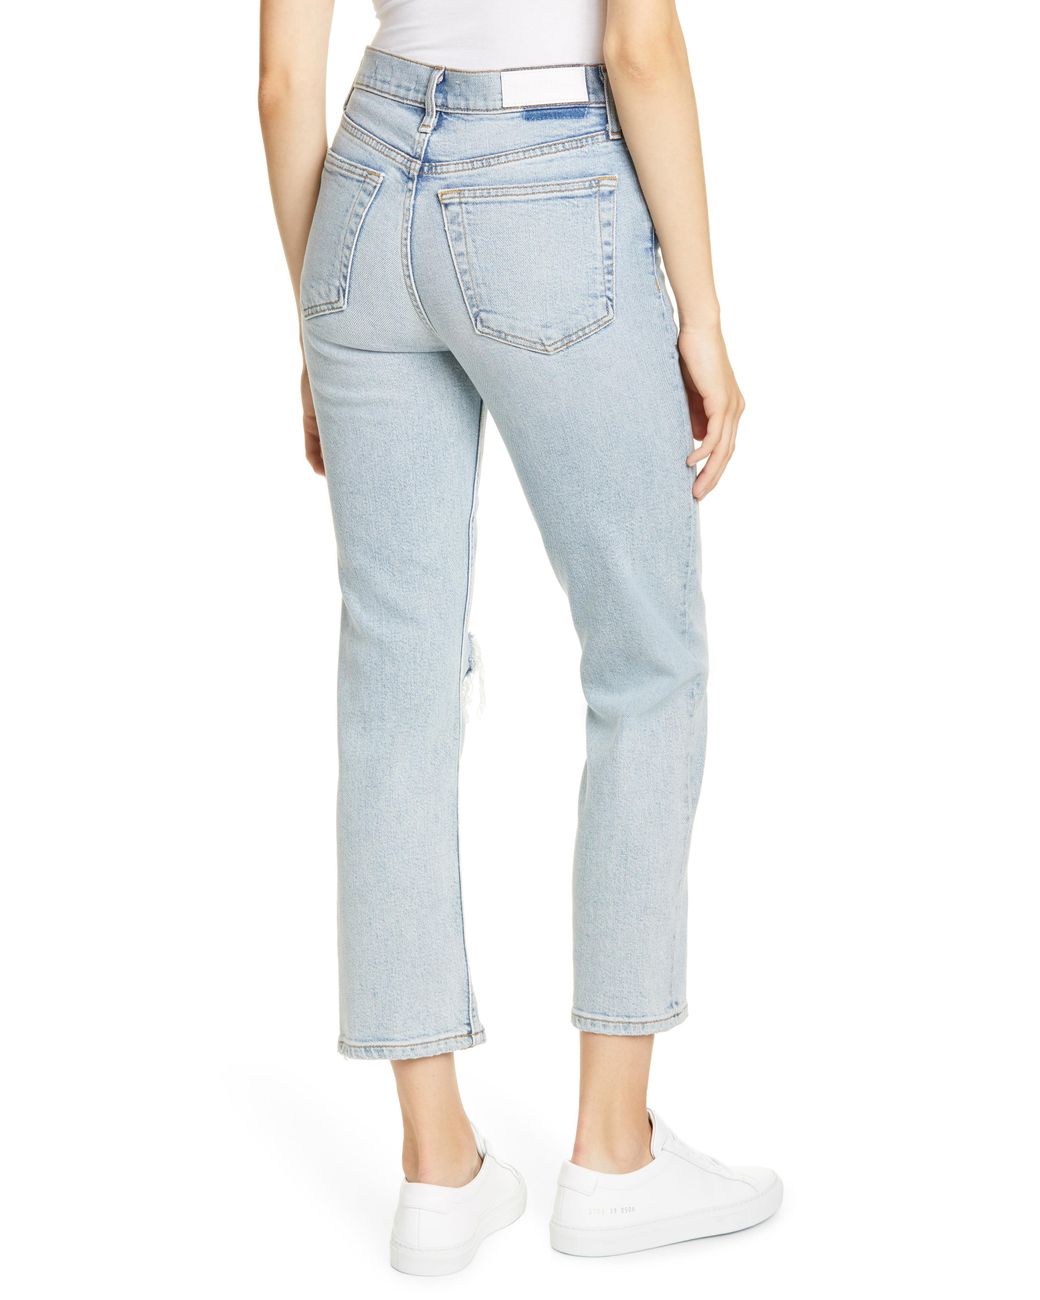 RE/DONE Denim Originals High Waist Stovepipe Jeans in Blue - Lyst